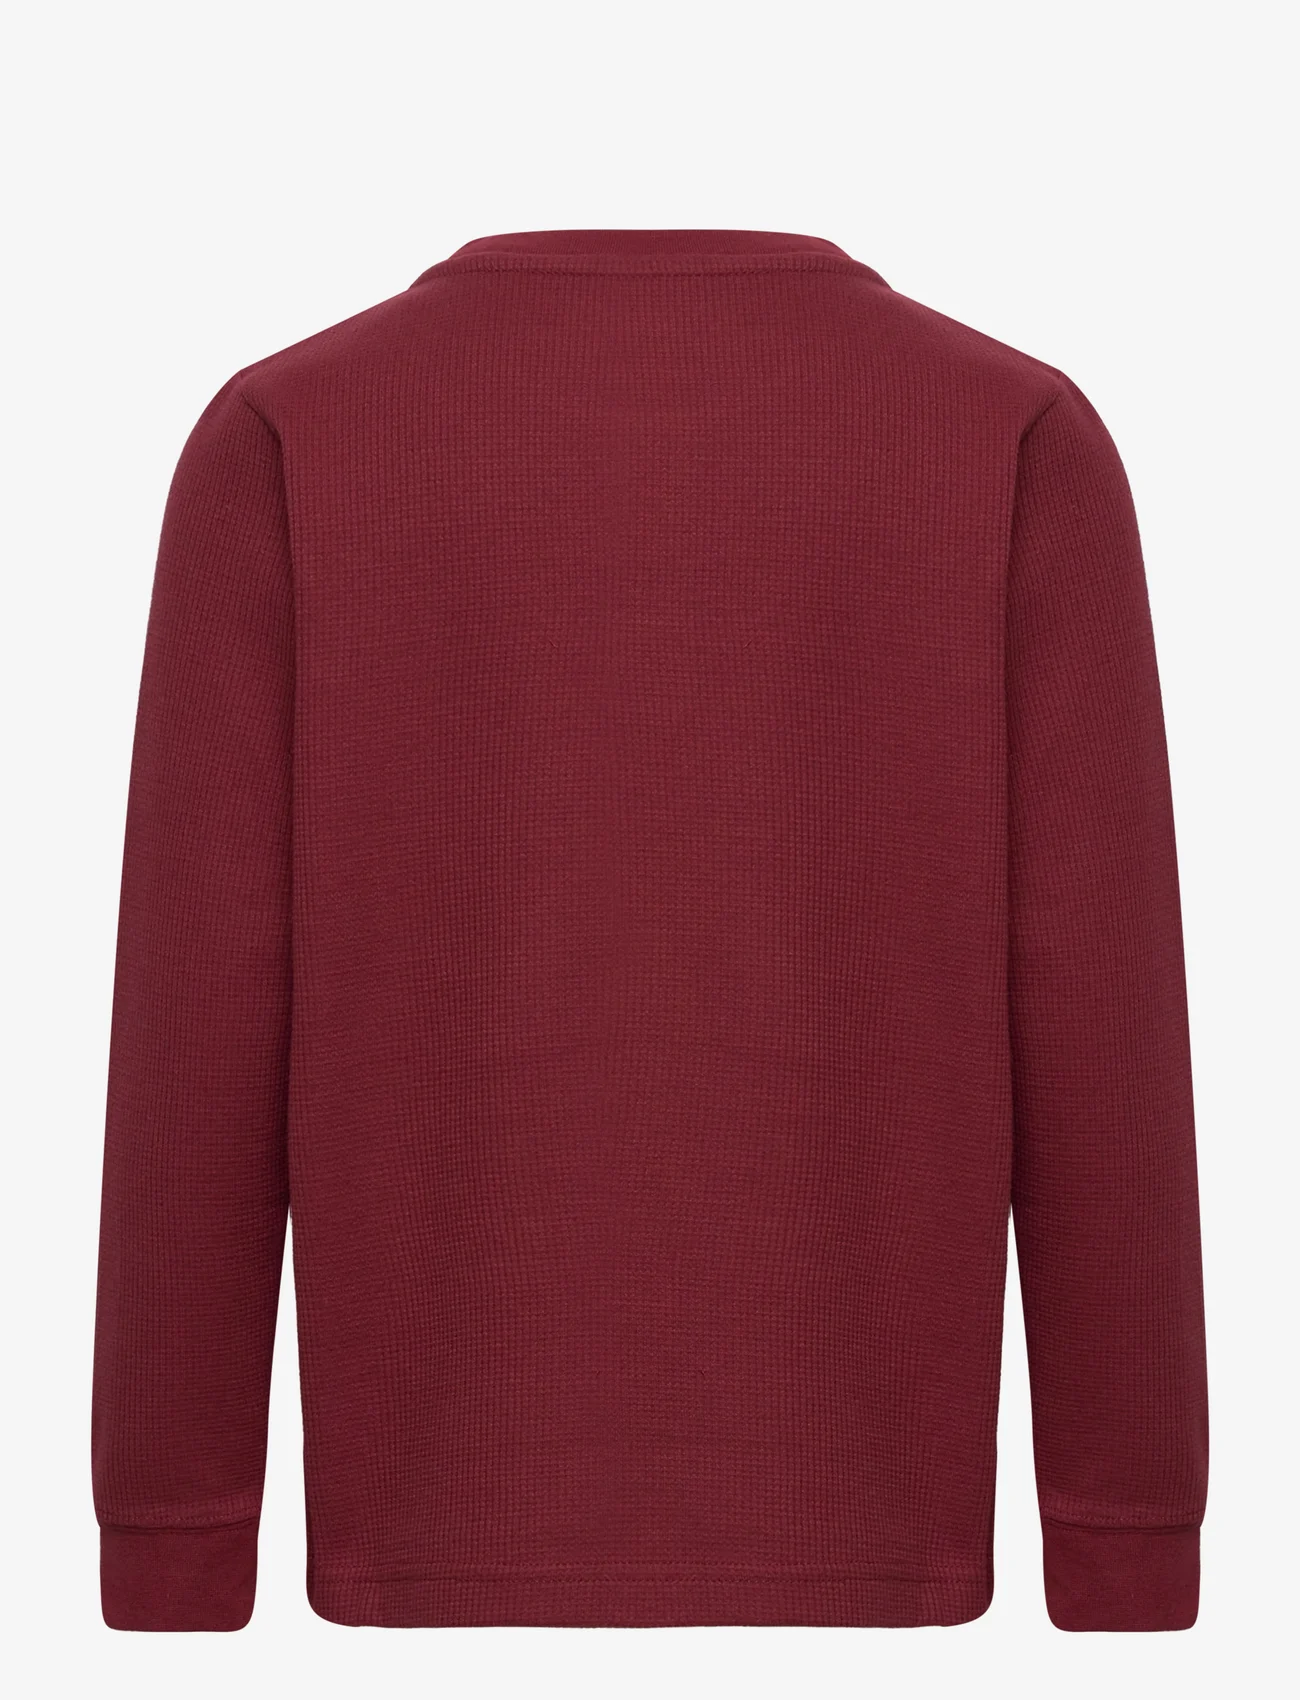 Levi's - Levi's® Thermal Crew Knit Top - pitkähihaiset t-paidat - red - 1